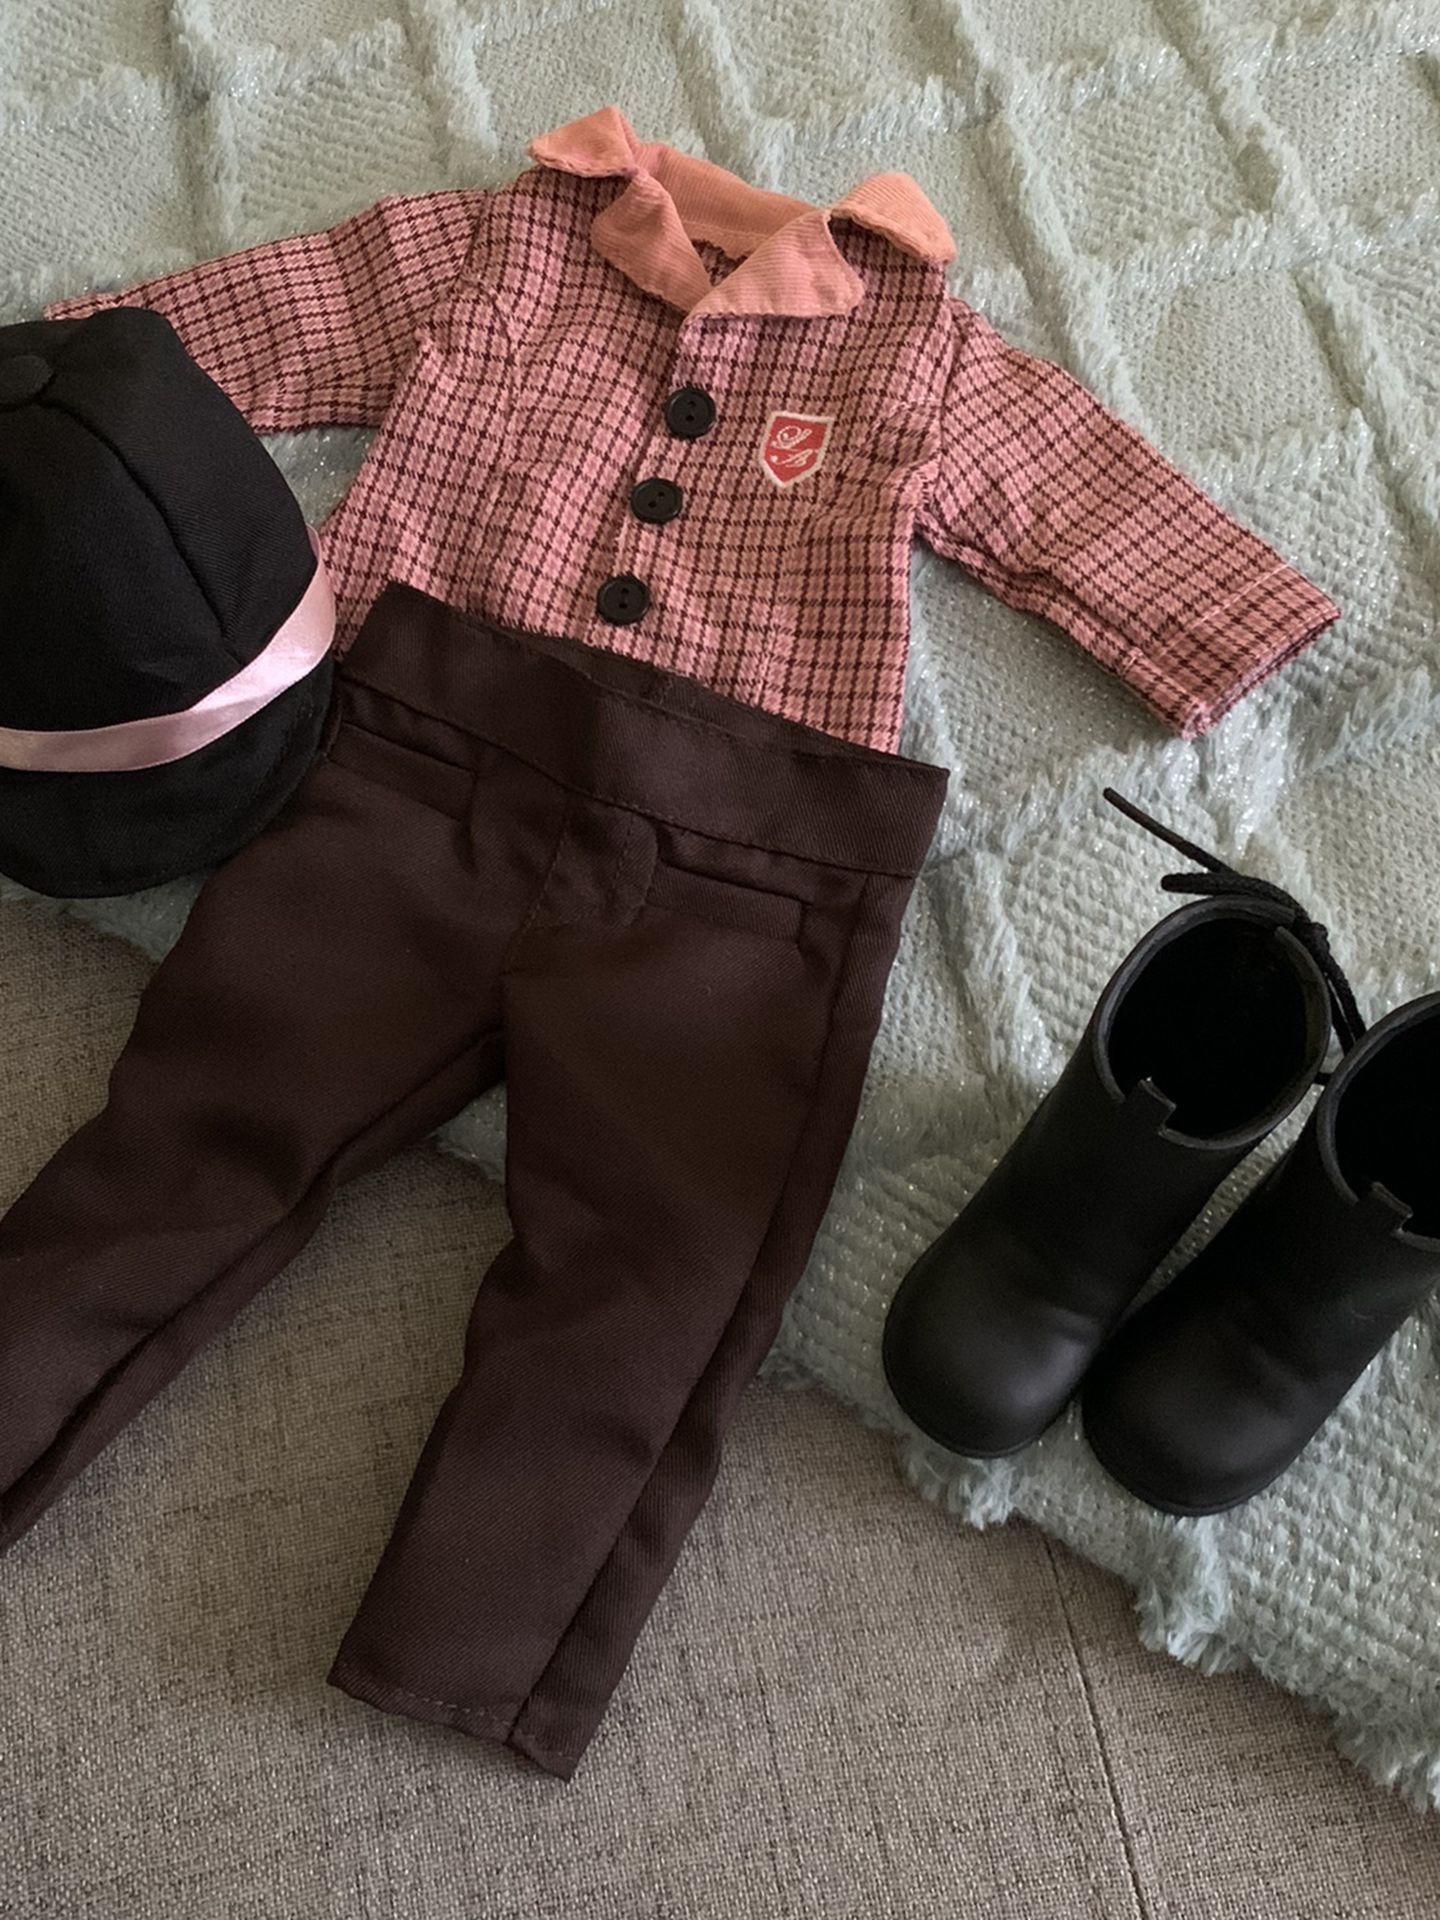 Our Generation Doll Horse Riding Outfit